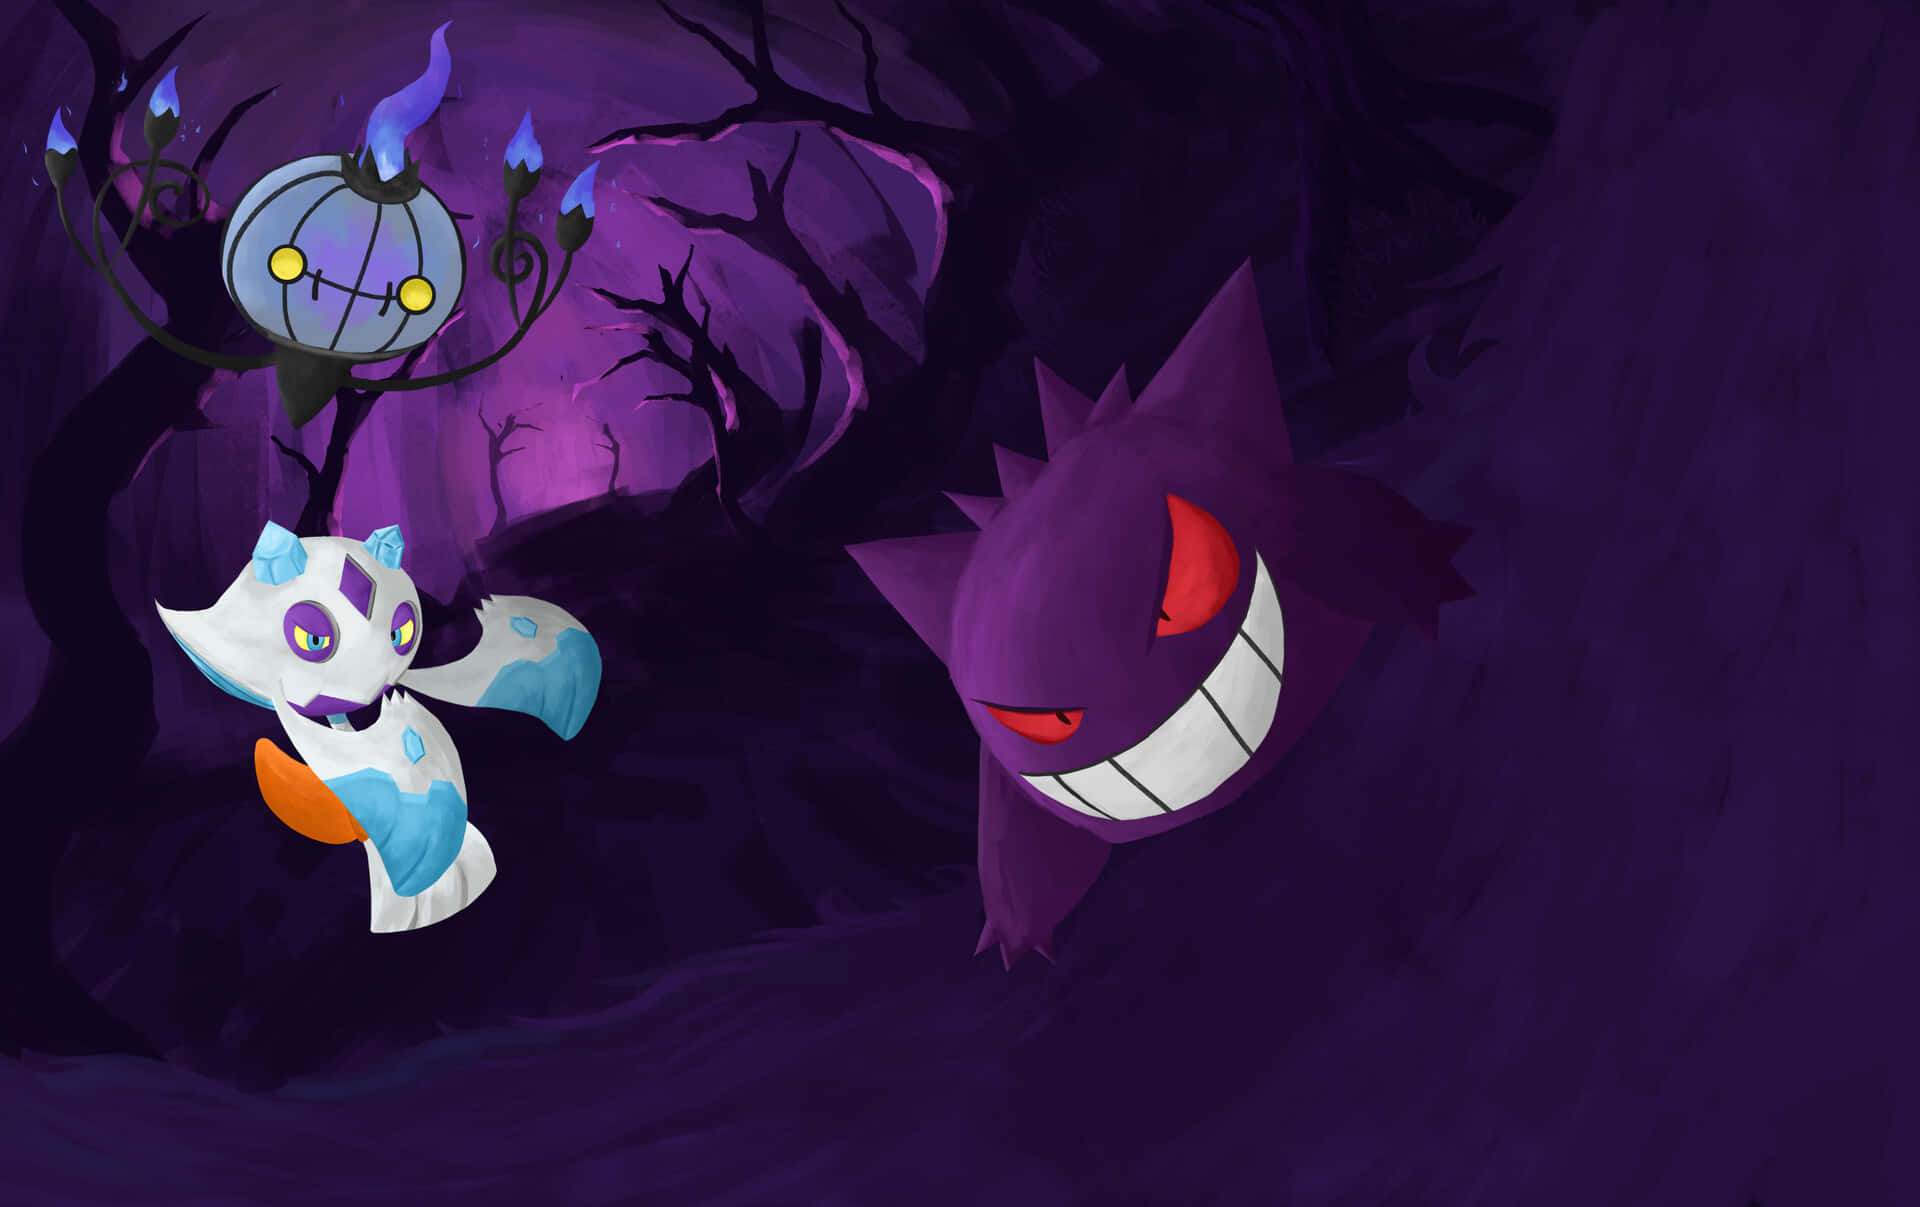 "Throw on your scariest cloak for Pokemon Halloween!" Wallpaper